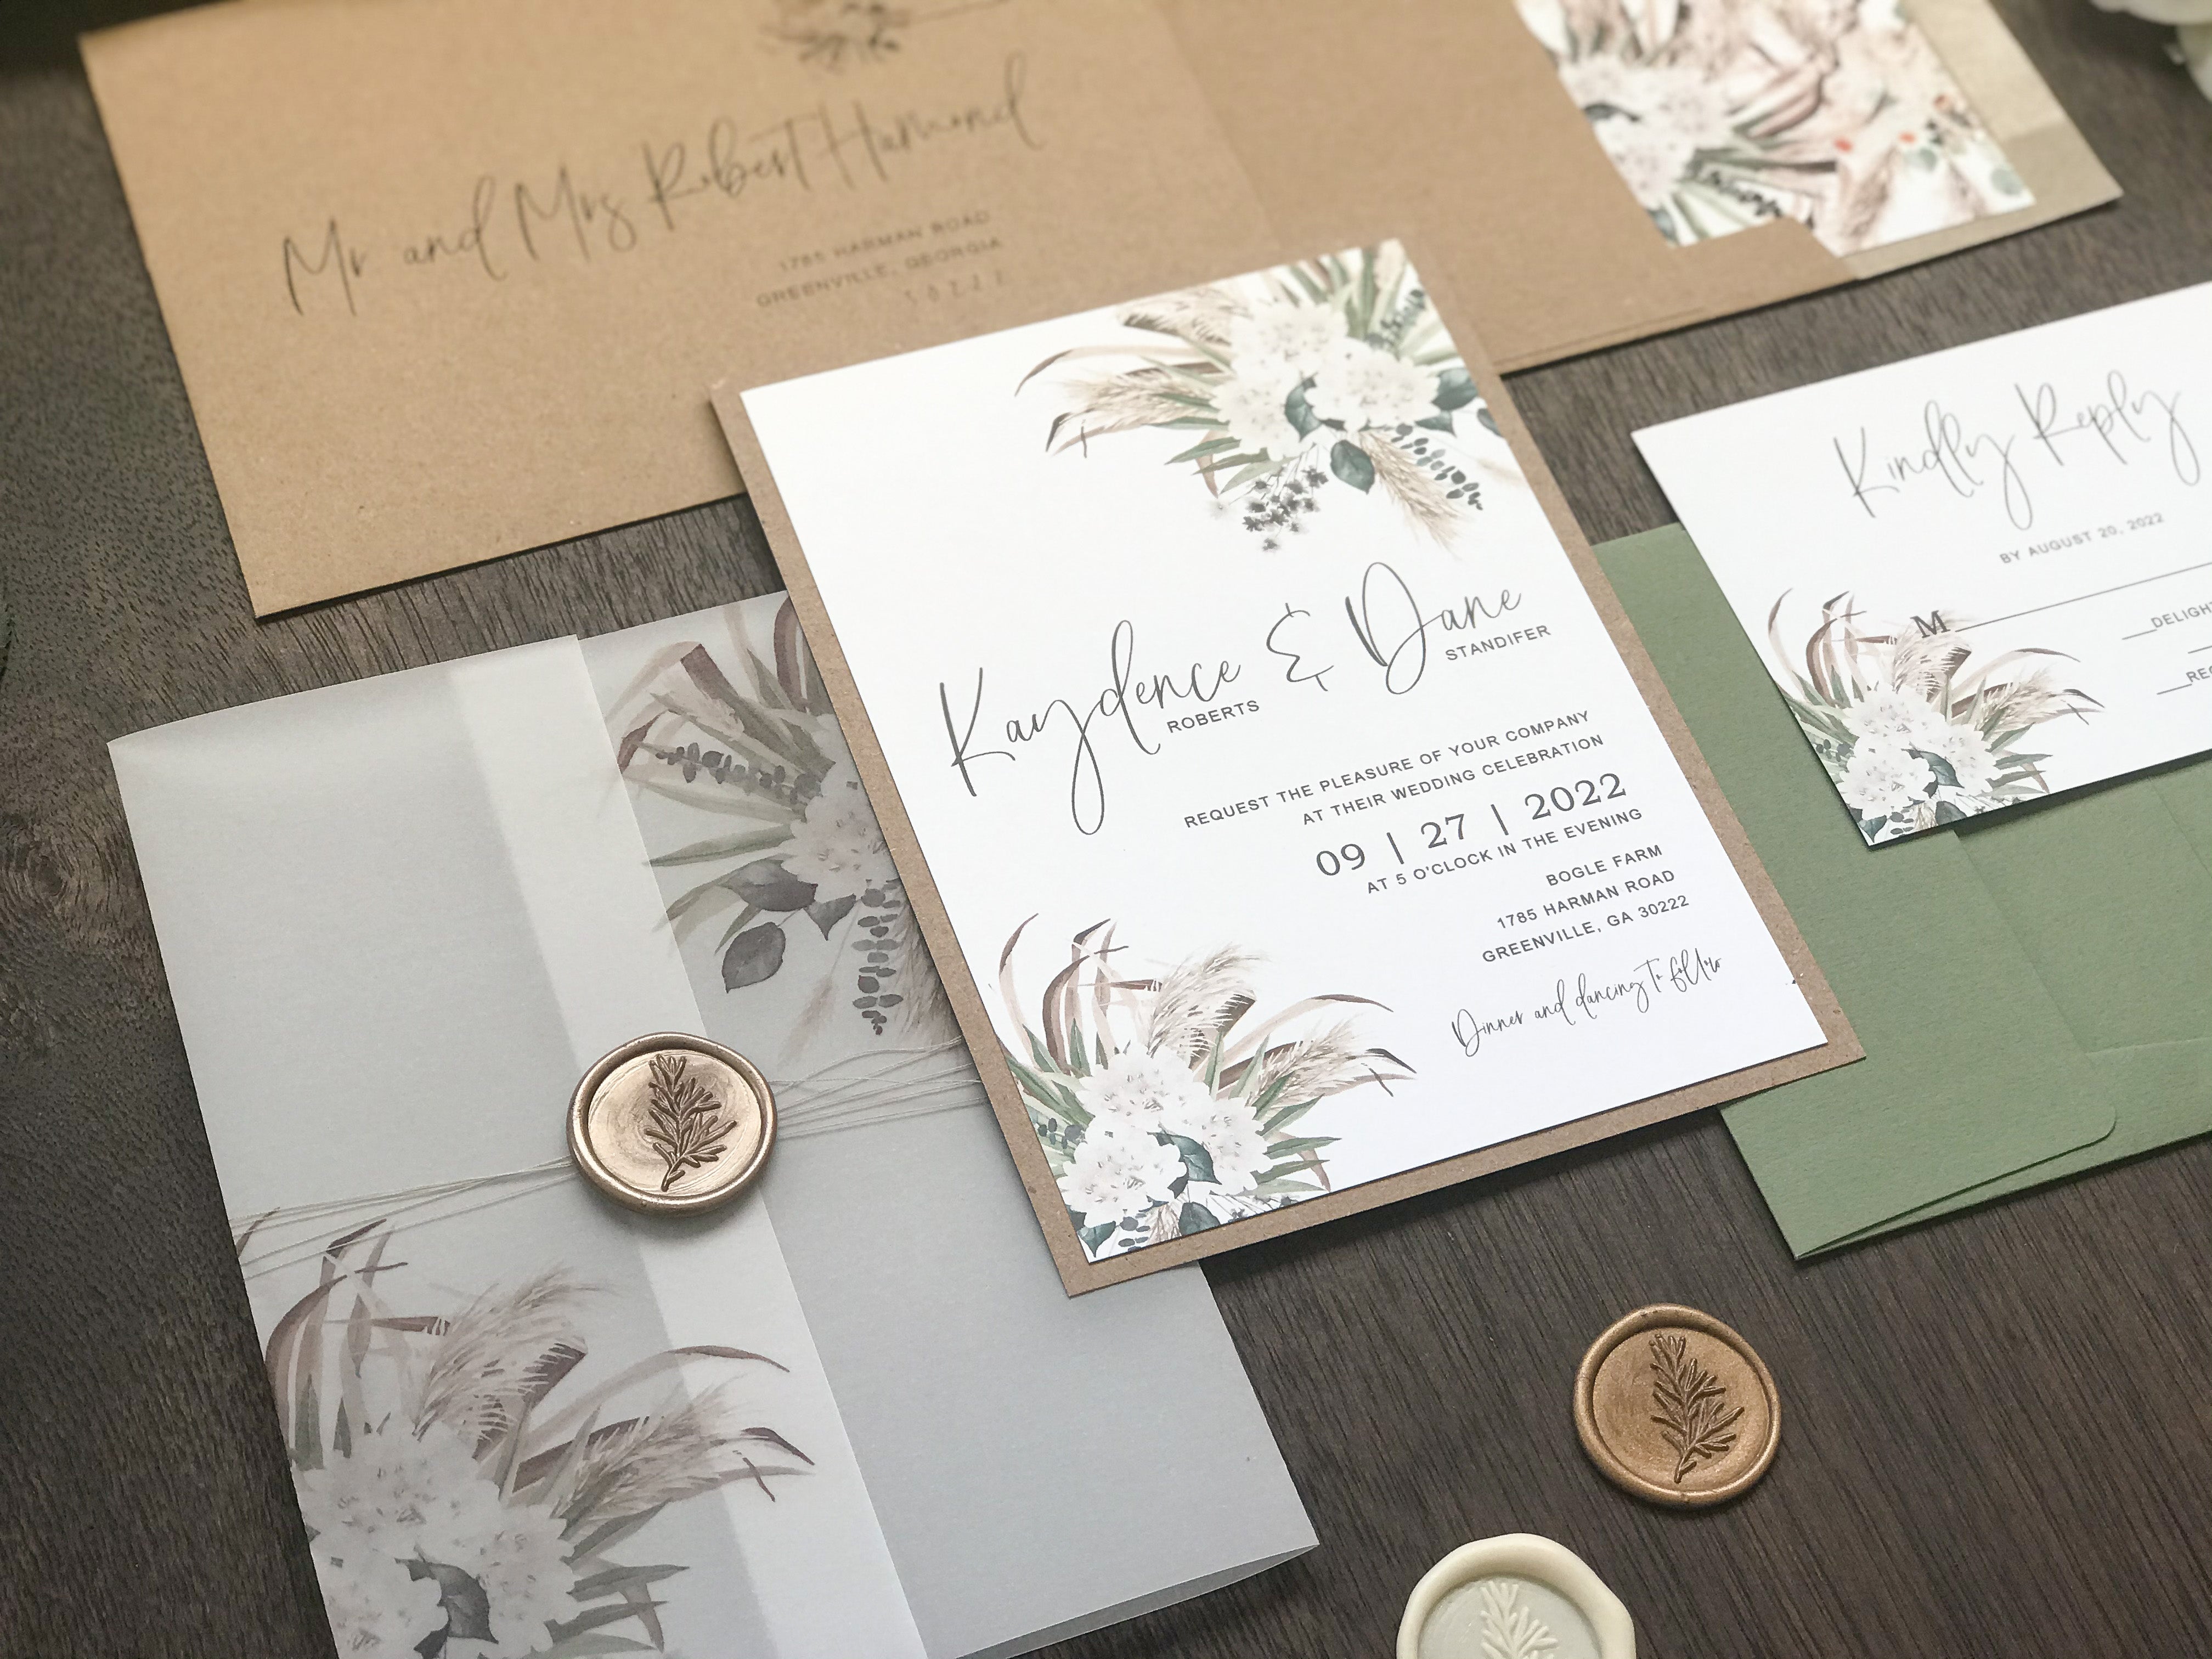 Boho Vellum Wedding Invitation with Wax Seal, White Flowers, Pampas Grass and Greenery